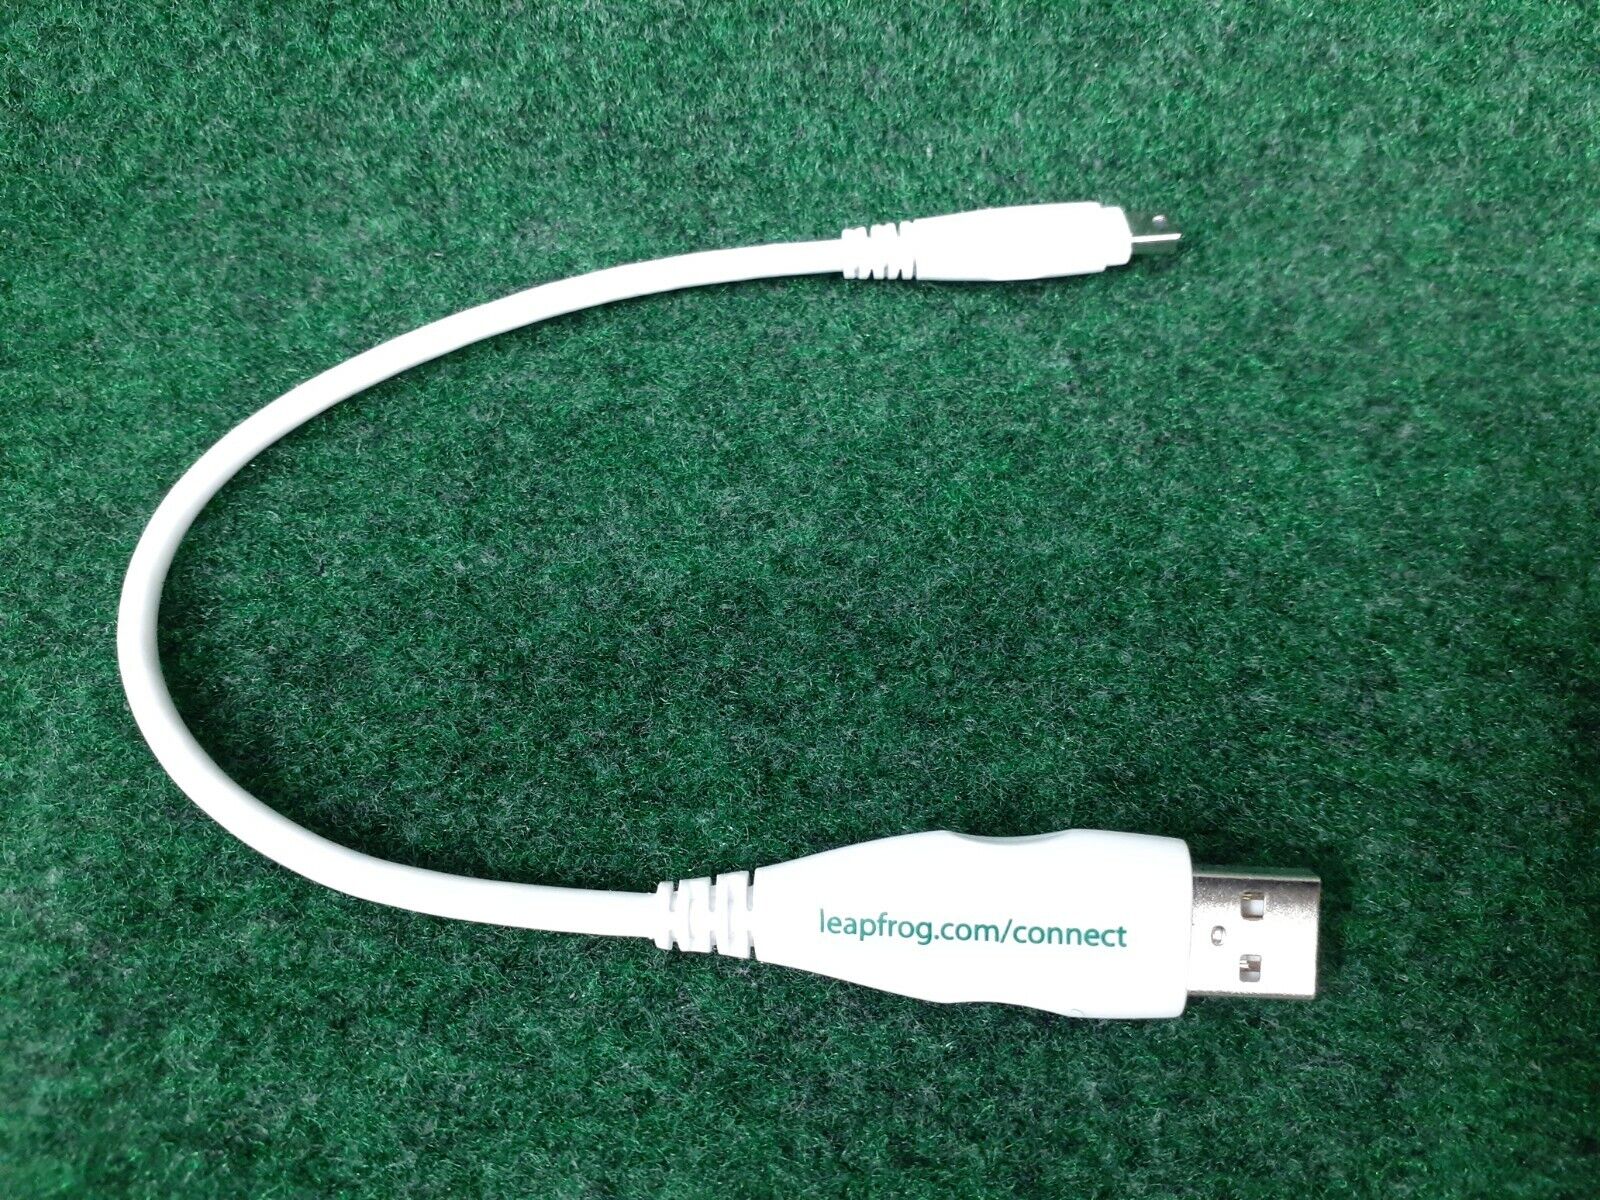 6” Leapfrog White Cable SYNC Connect Cable for LeapPad USB Data Cord